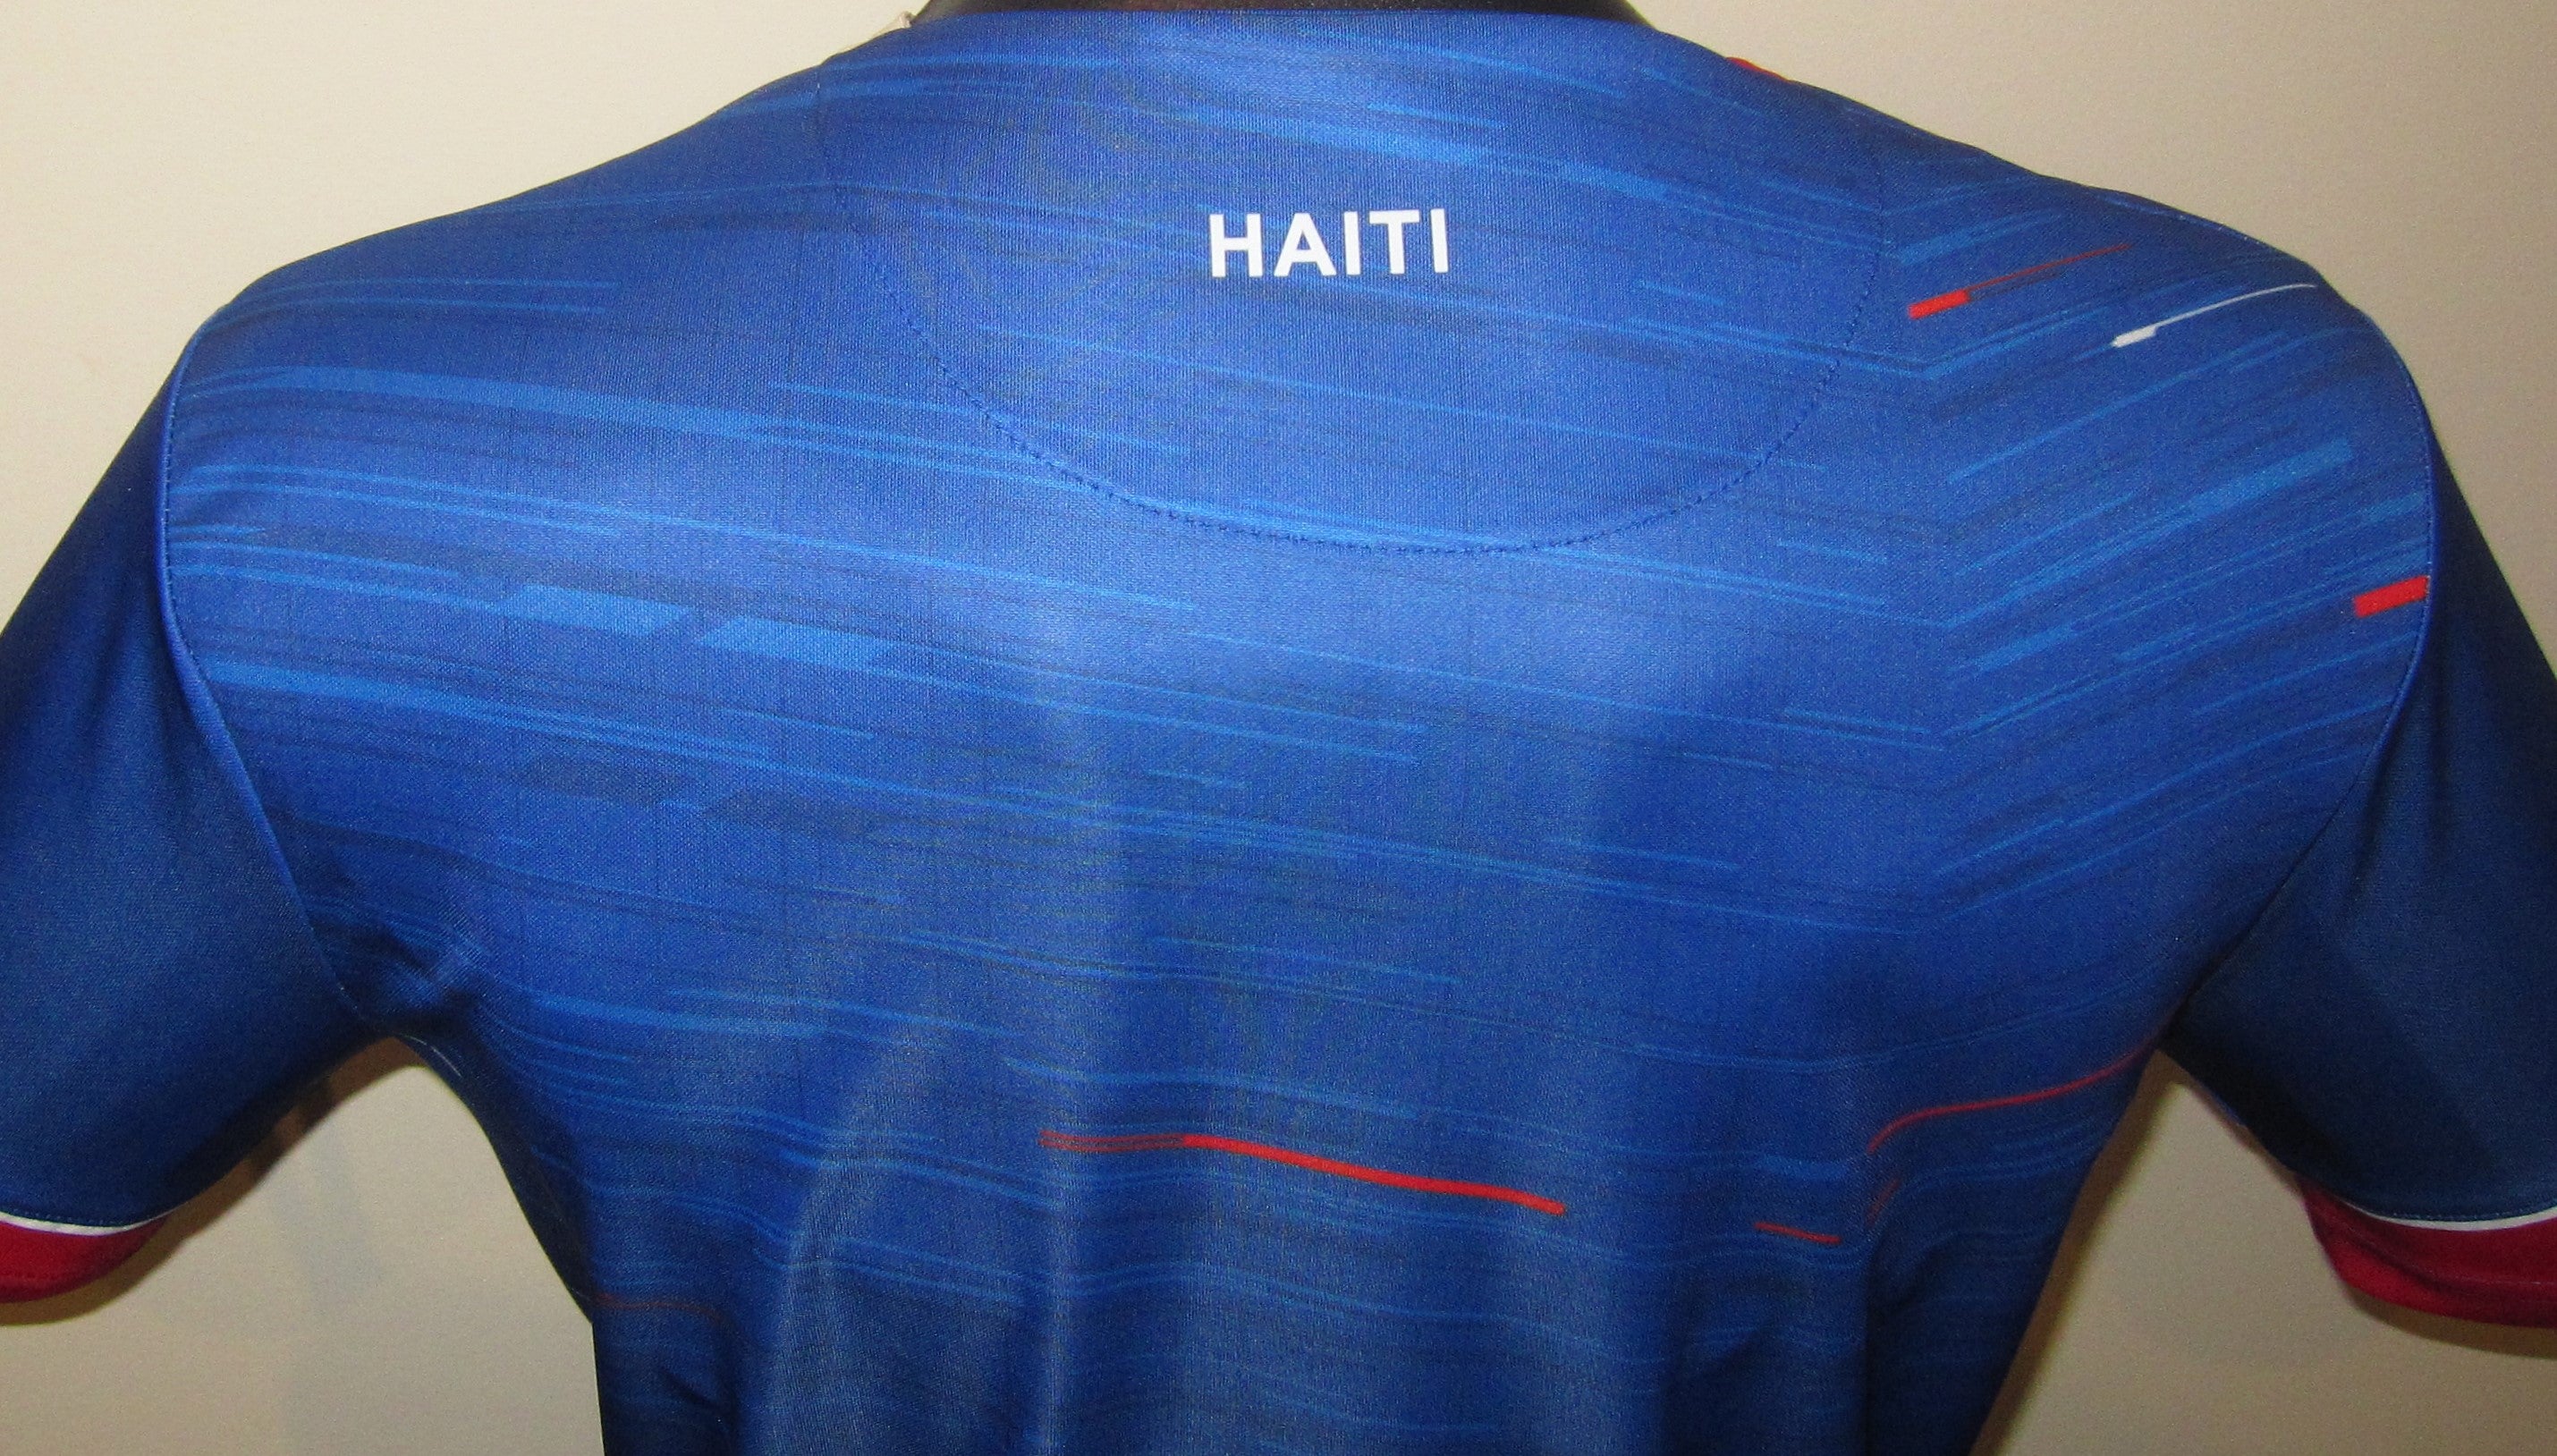 HAITI 22/23 AUTHENTIC RED JERSEY – LES GRENADIERS